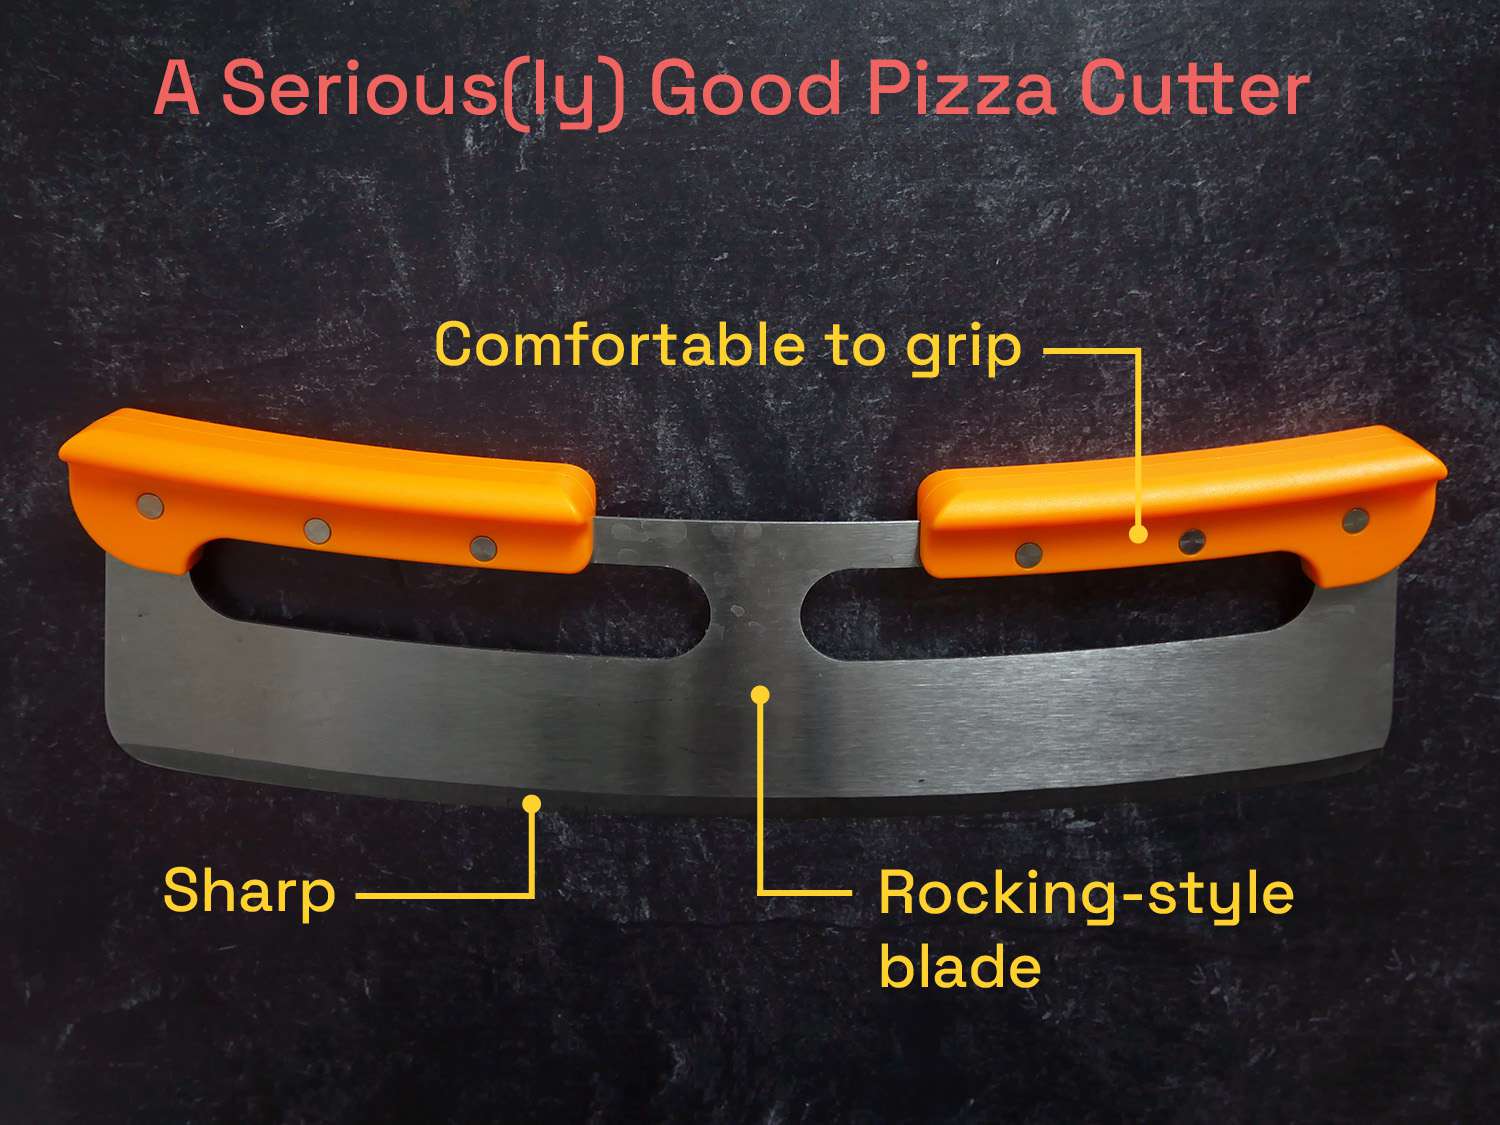 a seriously good pizza cutter: sharp, rocking-style blade, comfortable to grip